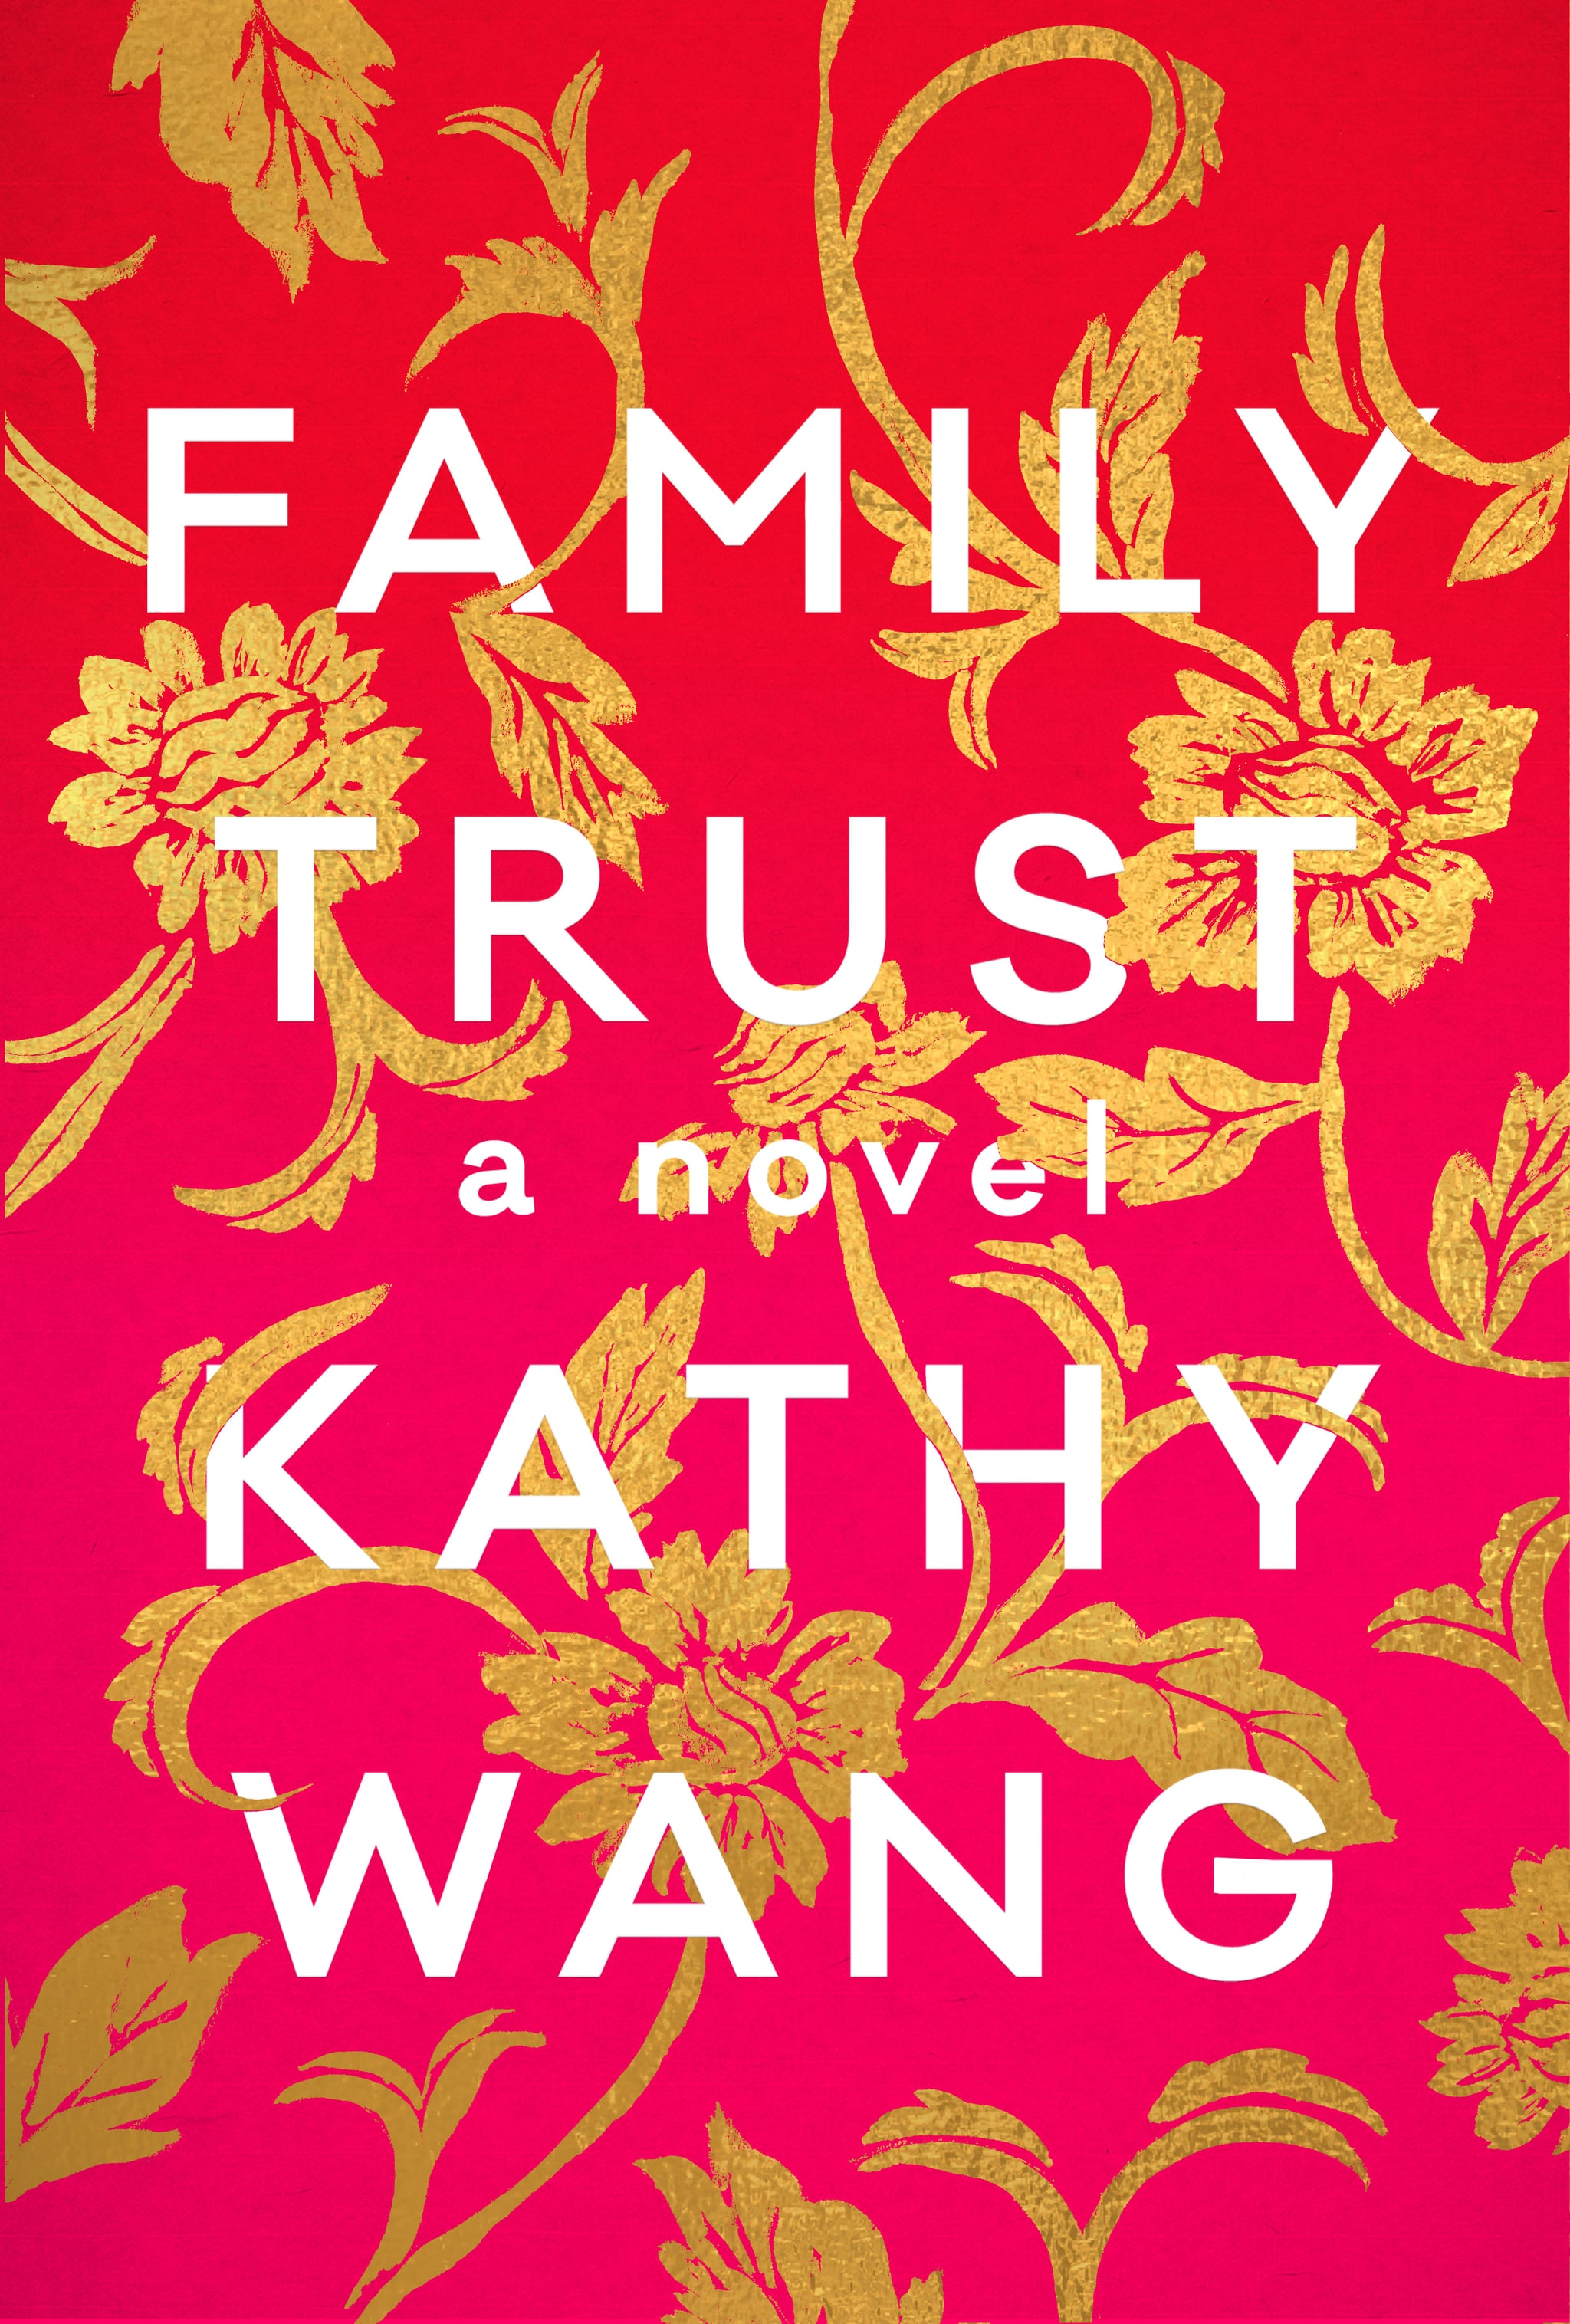 Family Trust by Kathy Wang, out Oct. 30